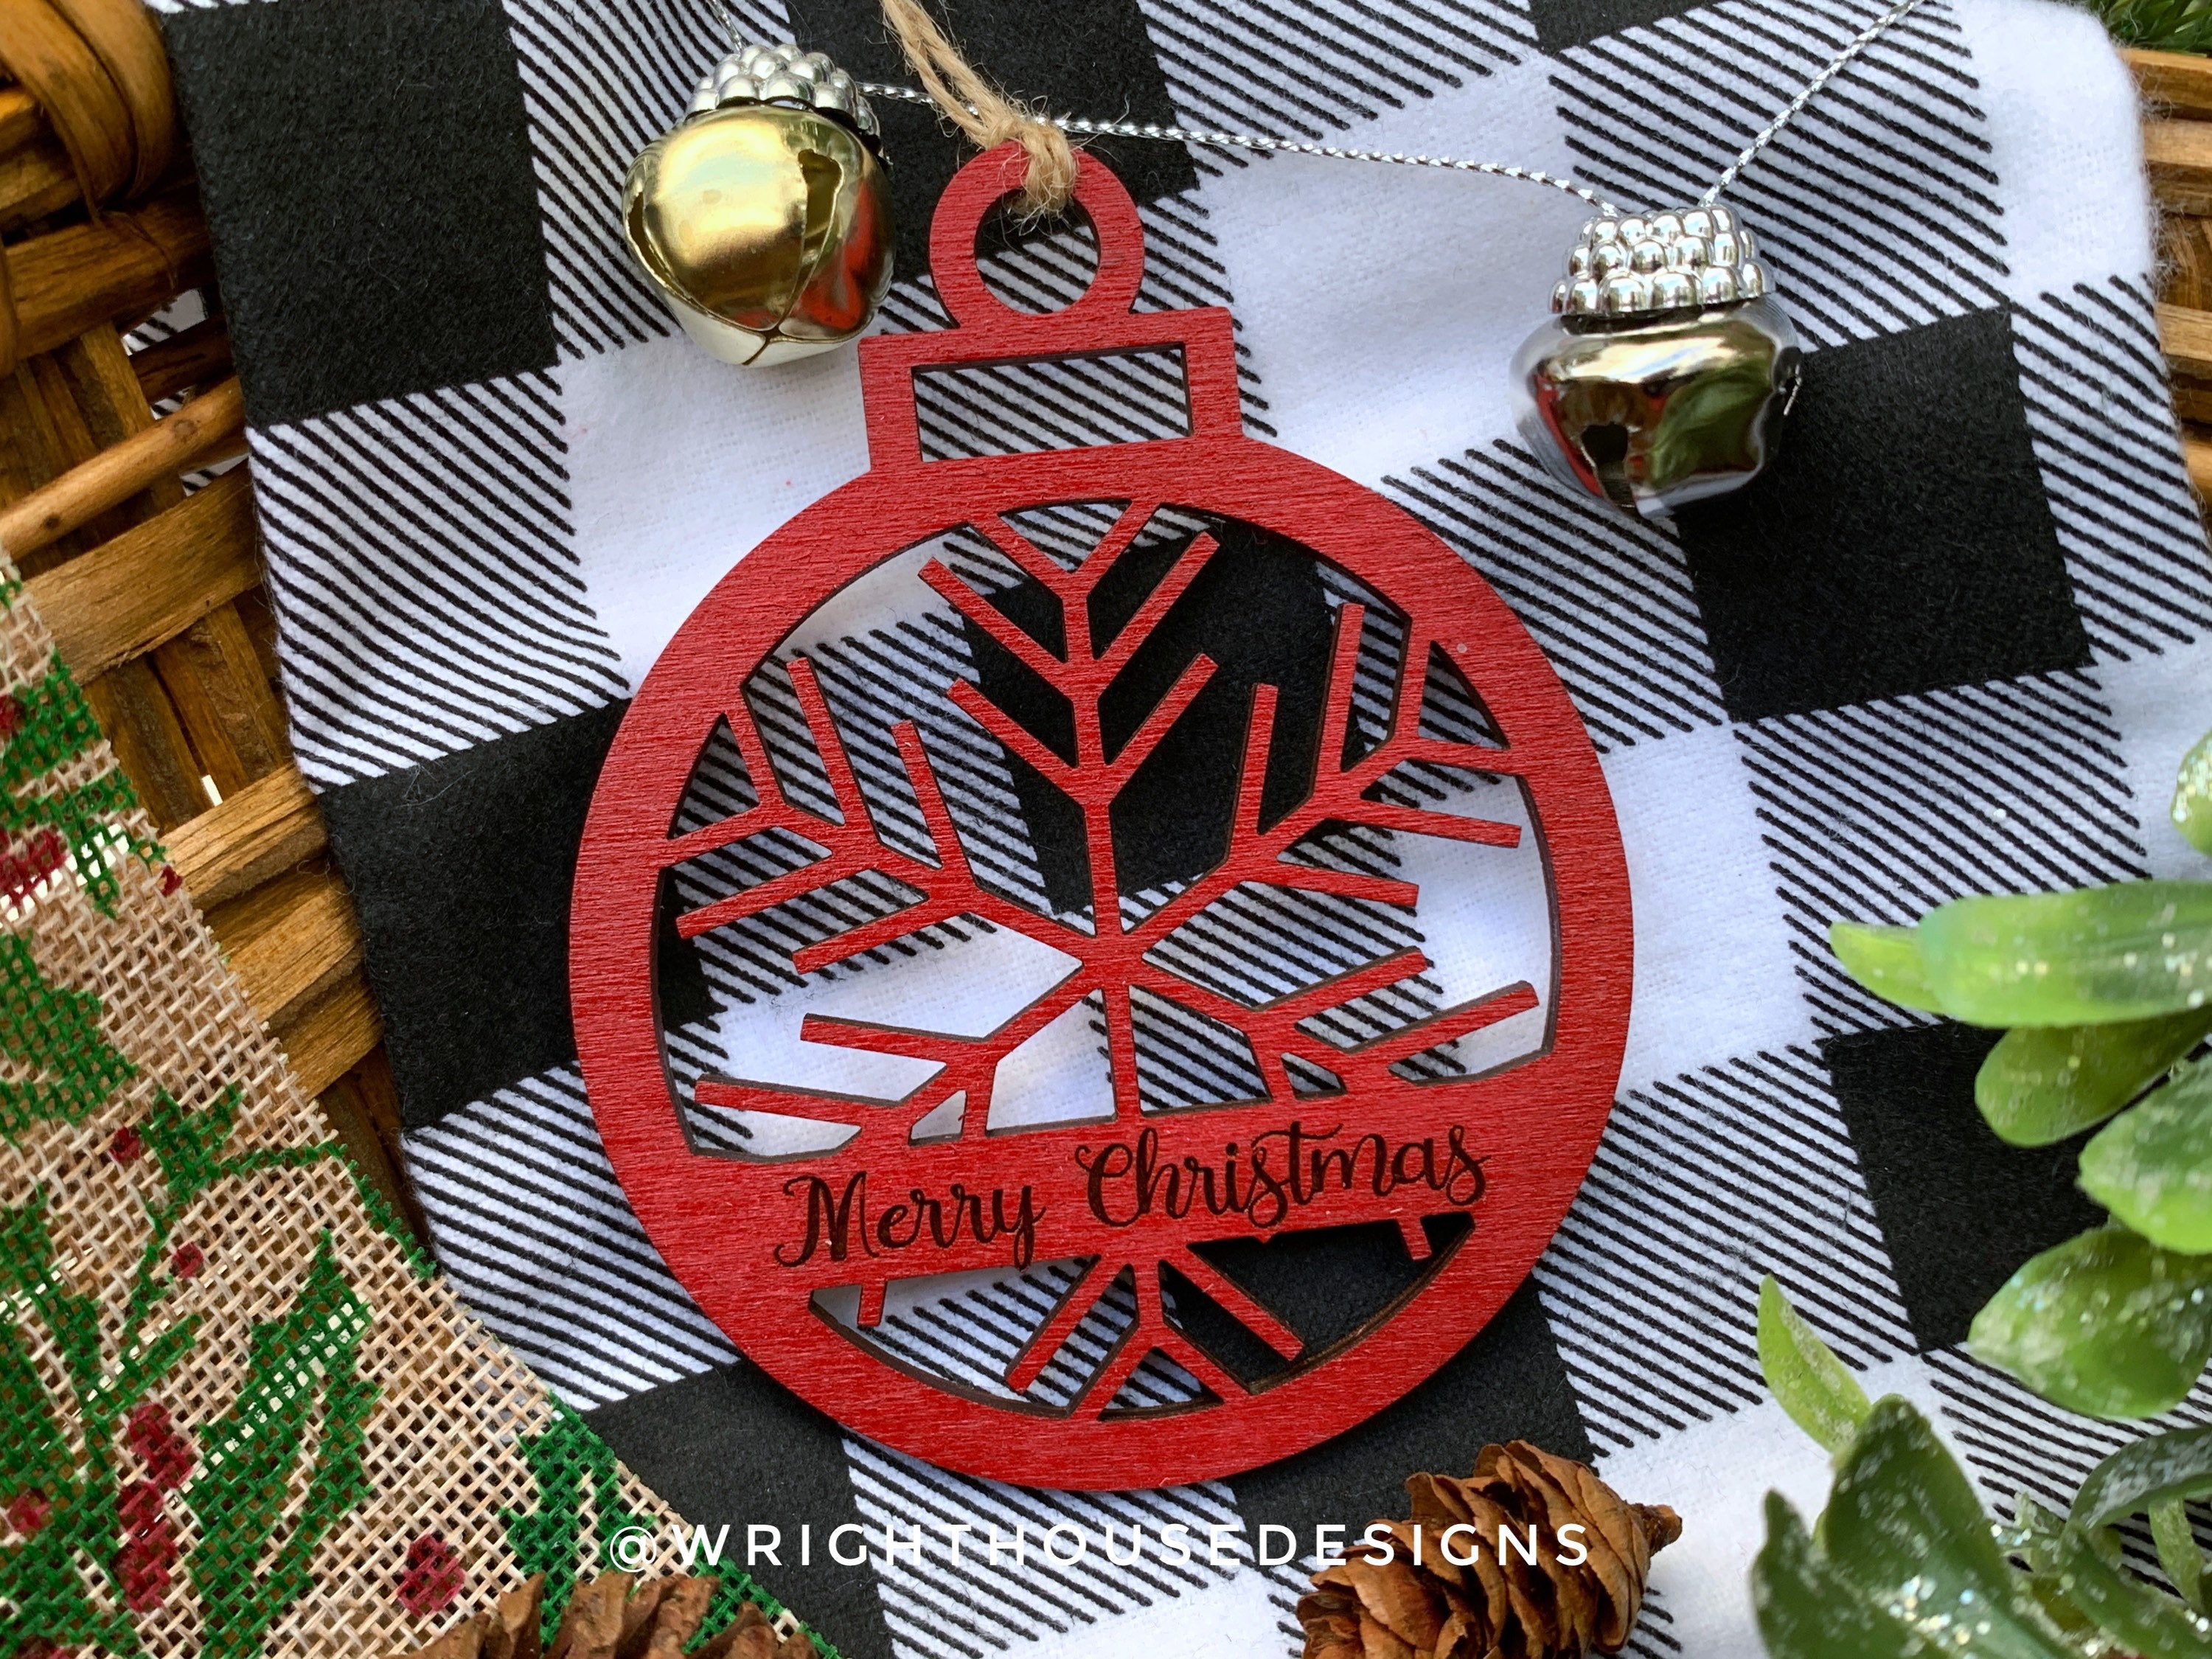 Engraved Family Names and Christmas Wishes - Personalized - Wooden Snowflake - Christmas Tree Ornament